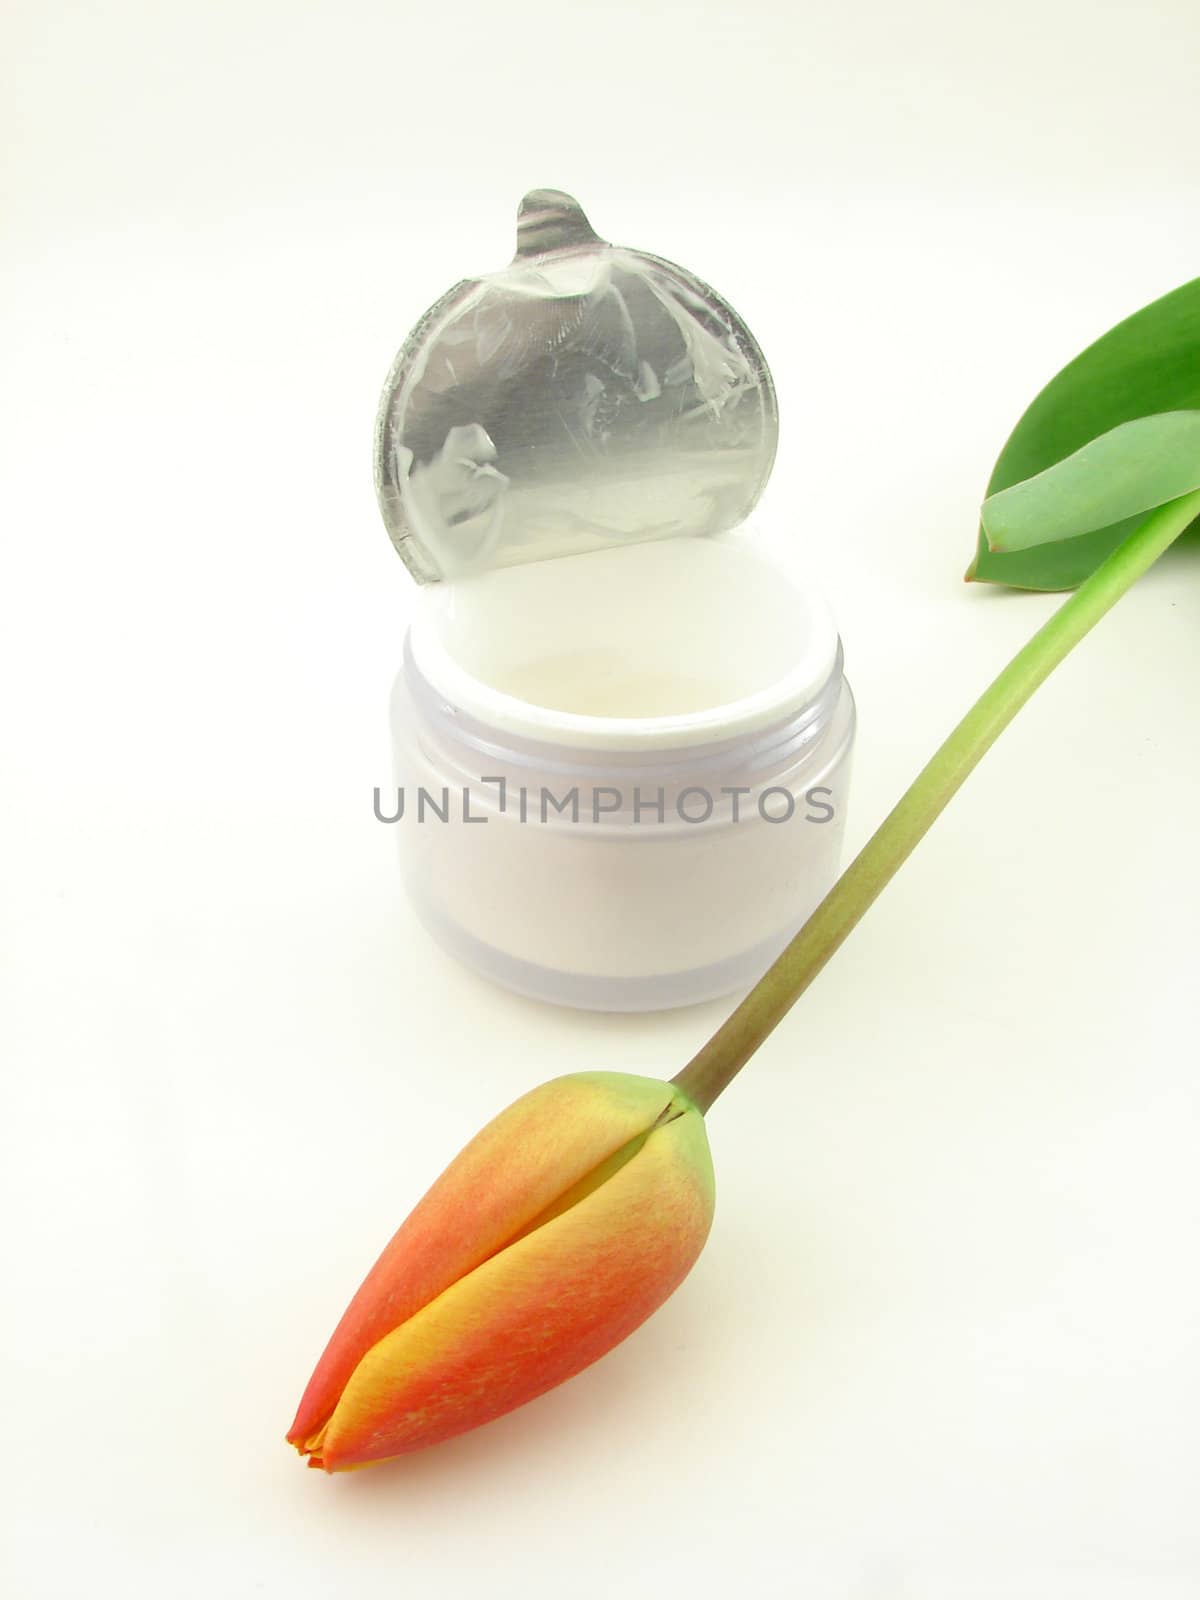 Tulips and cream isolated over white, concept of beauty.